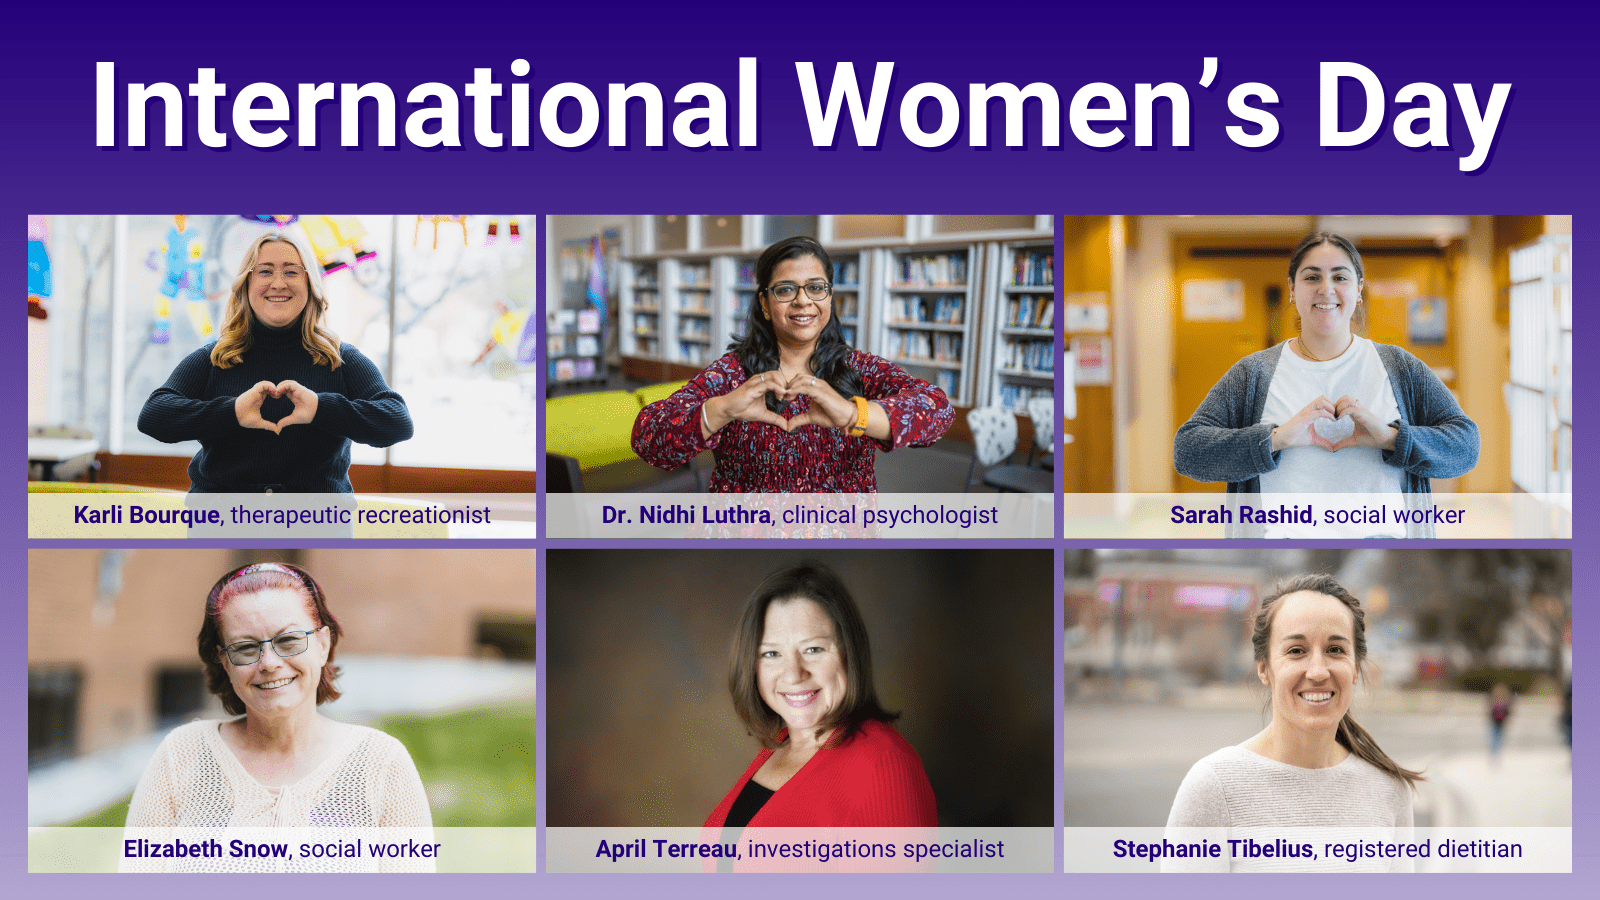 Six photos showing the people participating in the article, under the title International Women's Day.